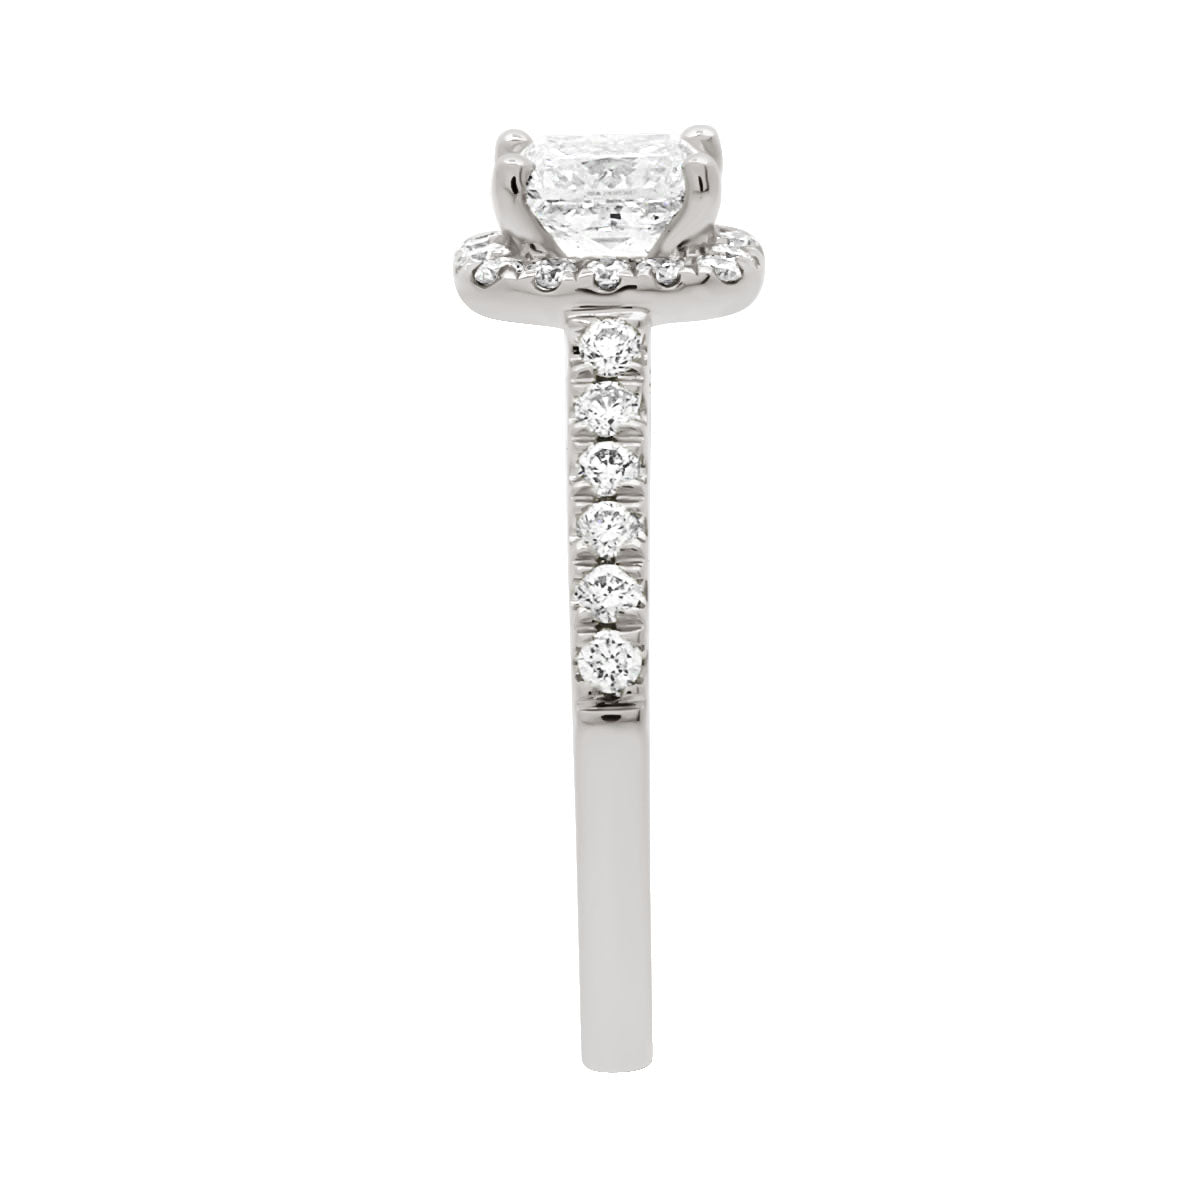 Princess Cut Diamond Halo Ring in white gold standing upright from a side view